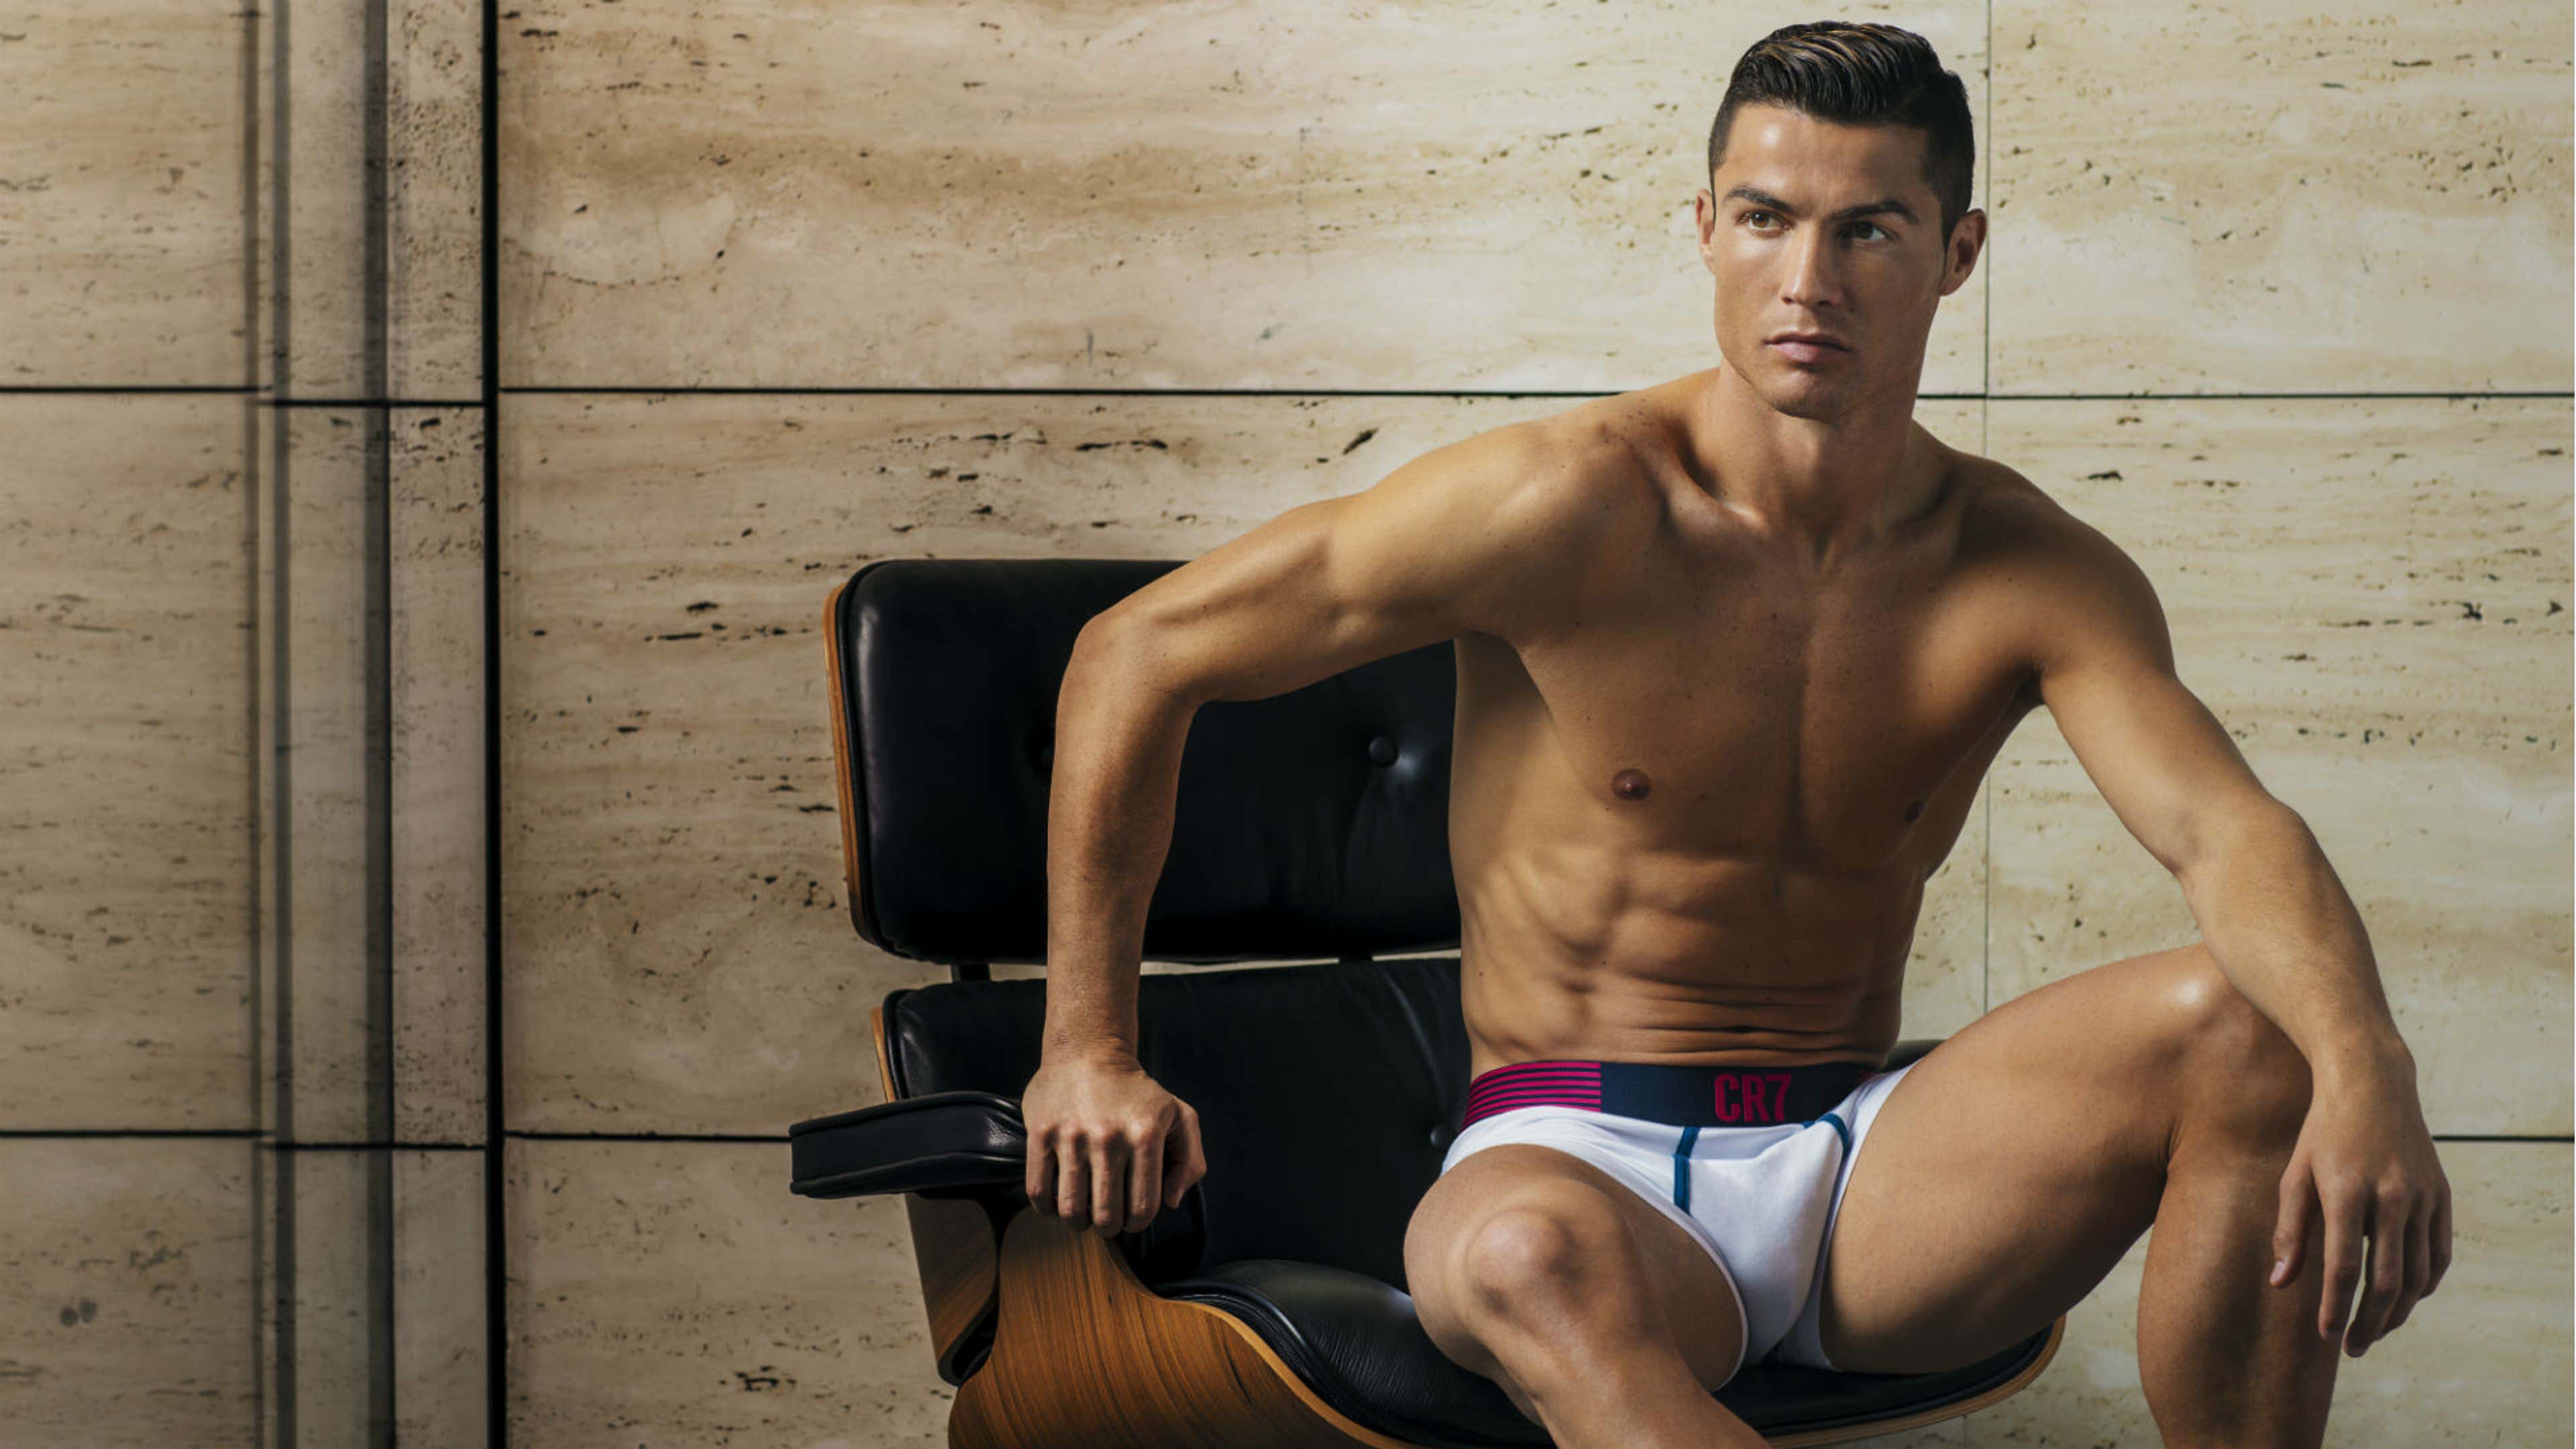 Cristiano Ronaldo has released a look at his SS18 CR7 Underwear